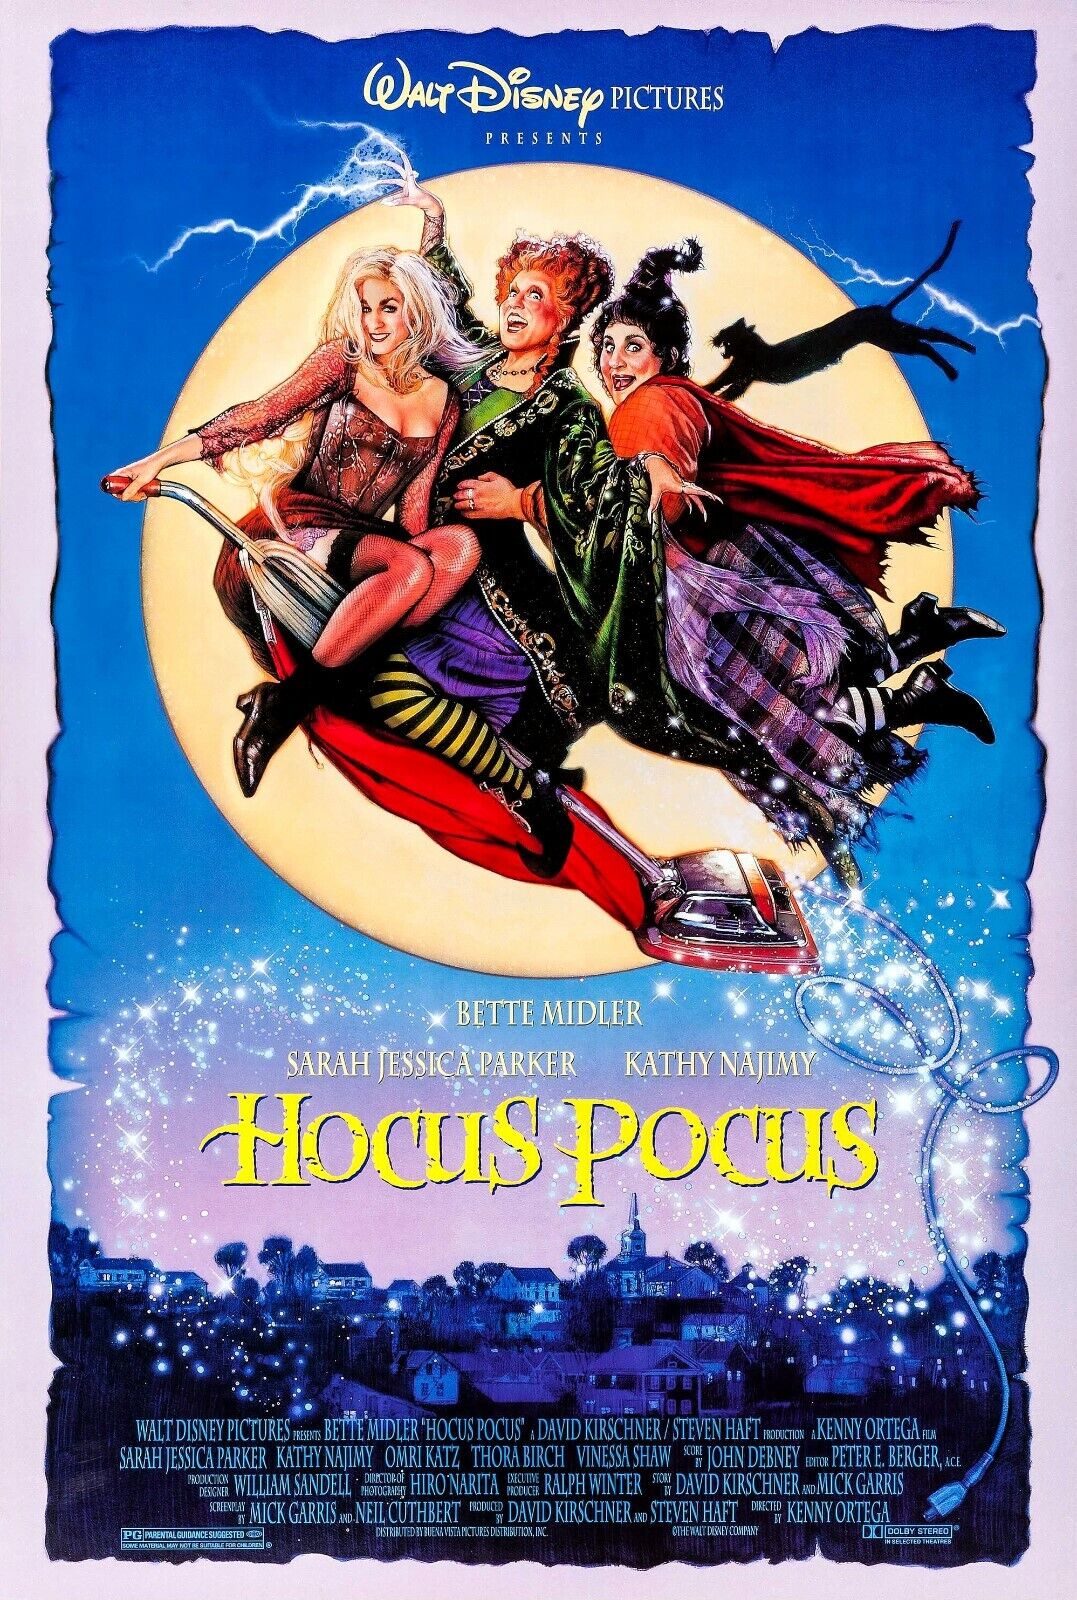 drawing of three witches on broom - hocus pocus movie poster